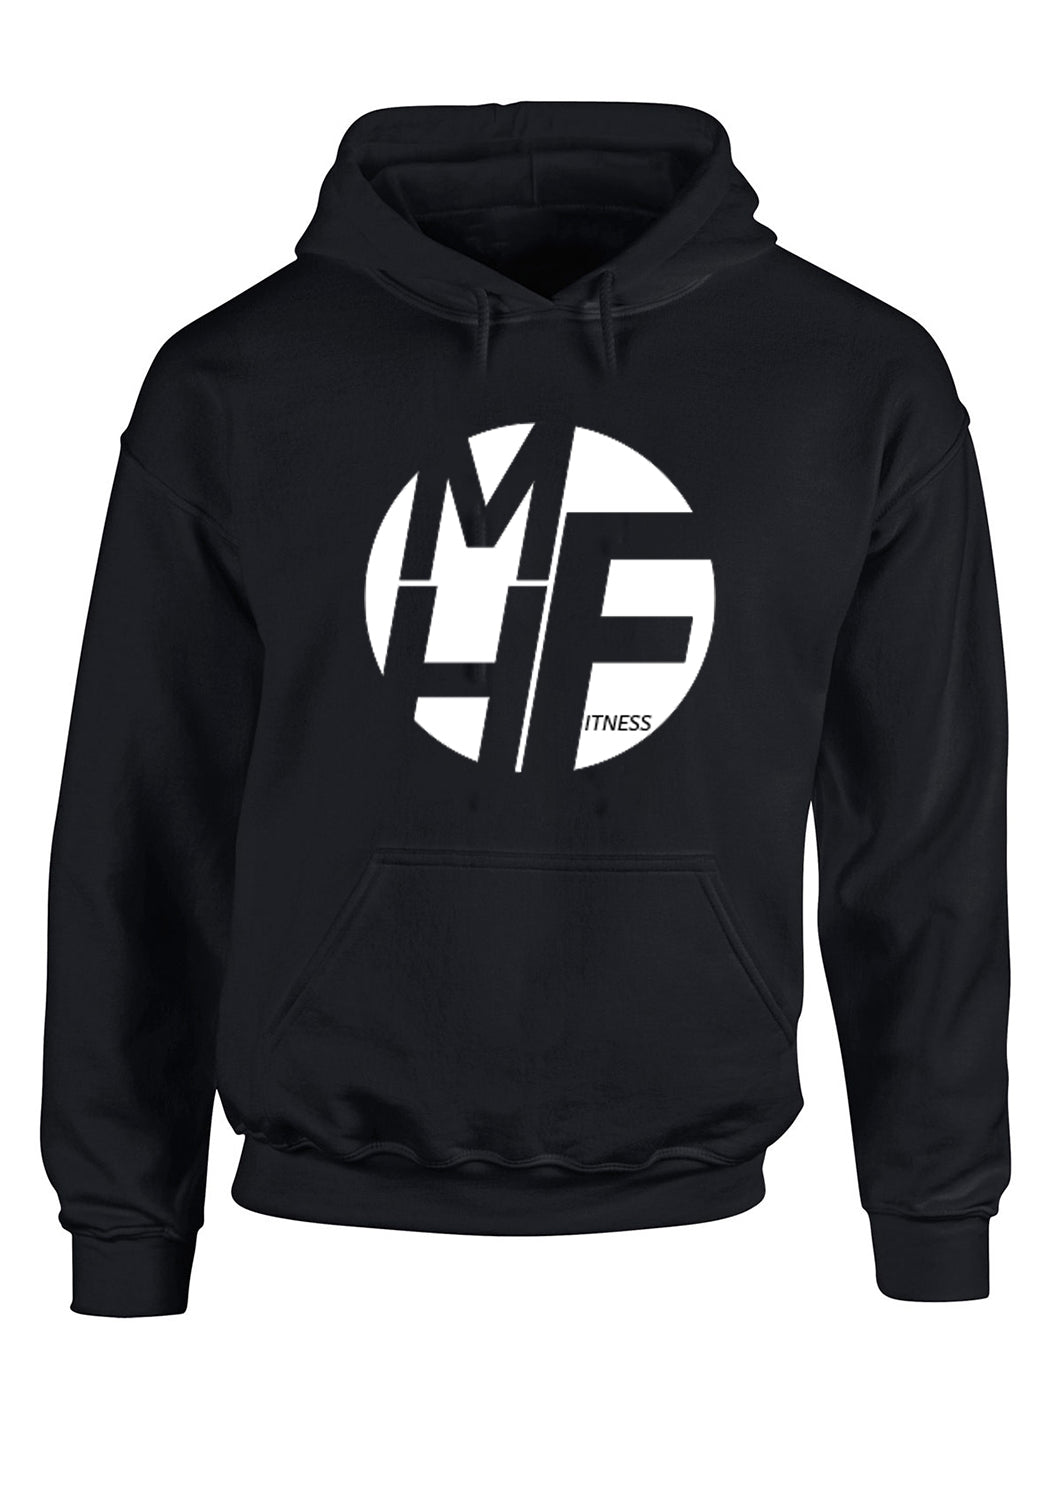 Limited Edition MHF Hoody